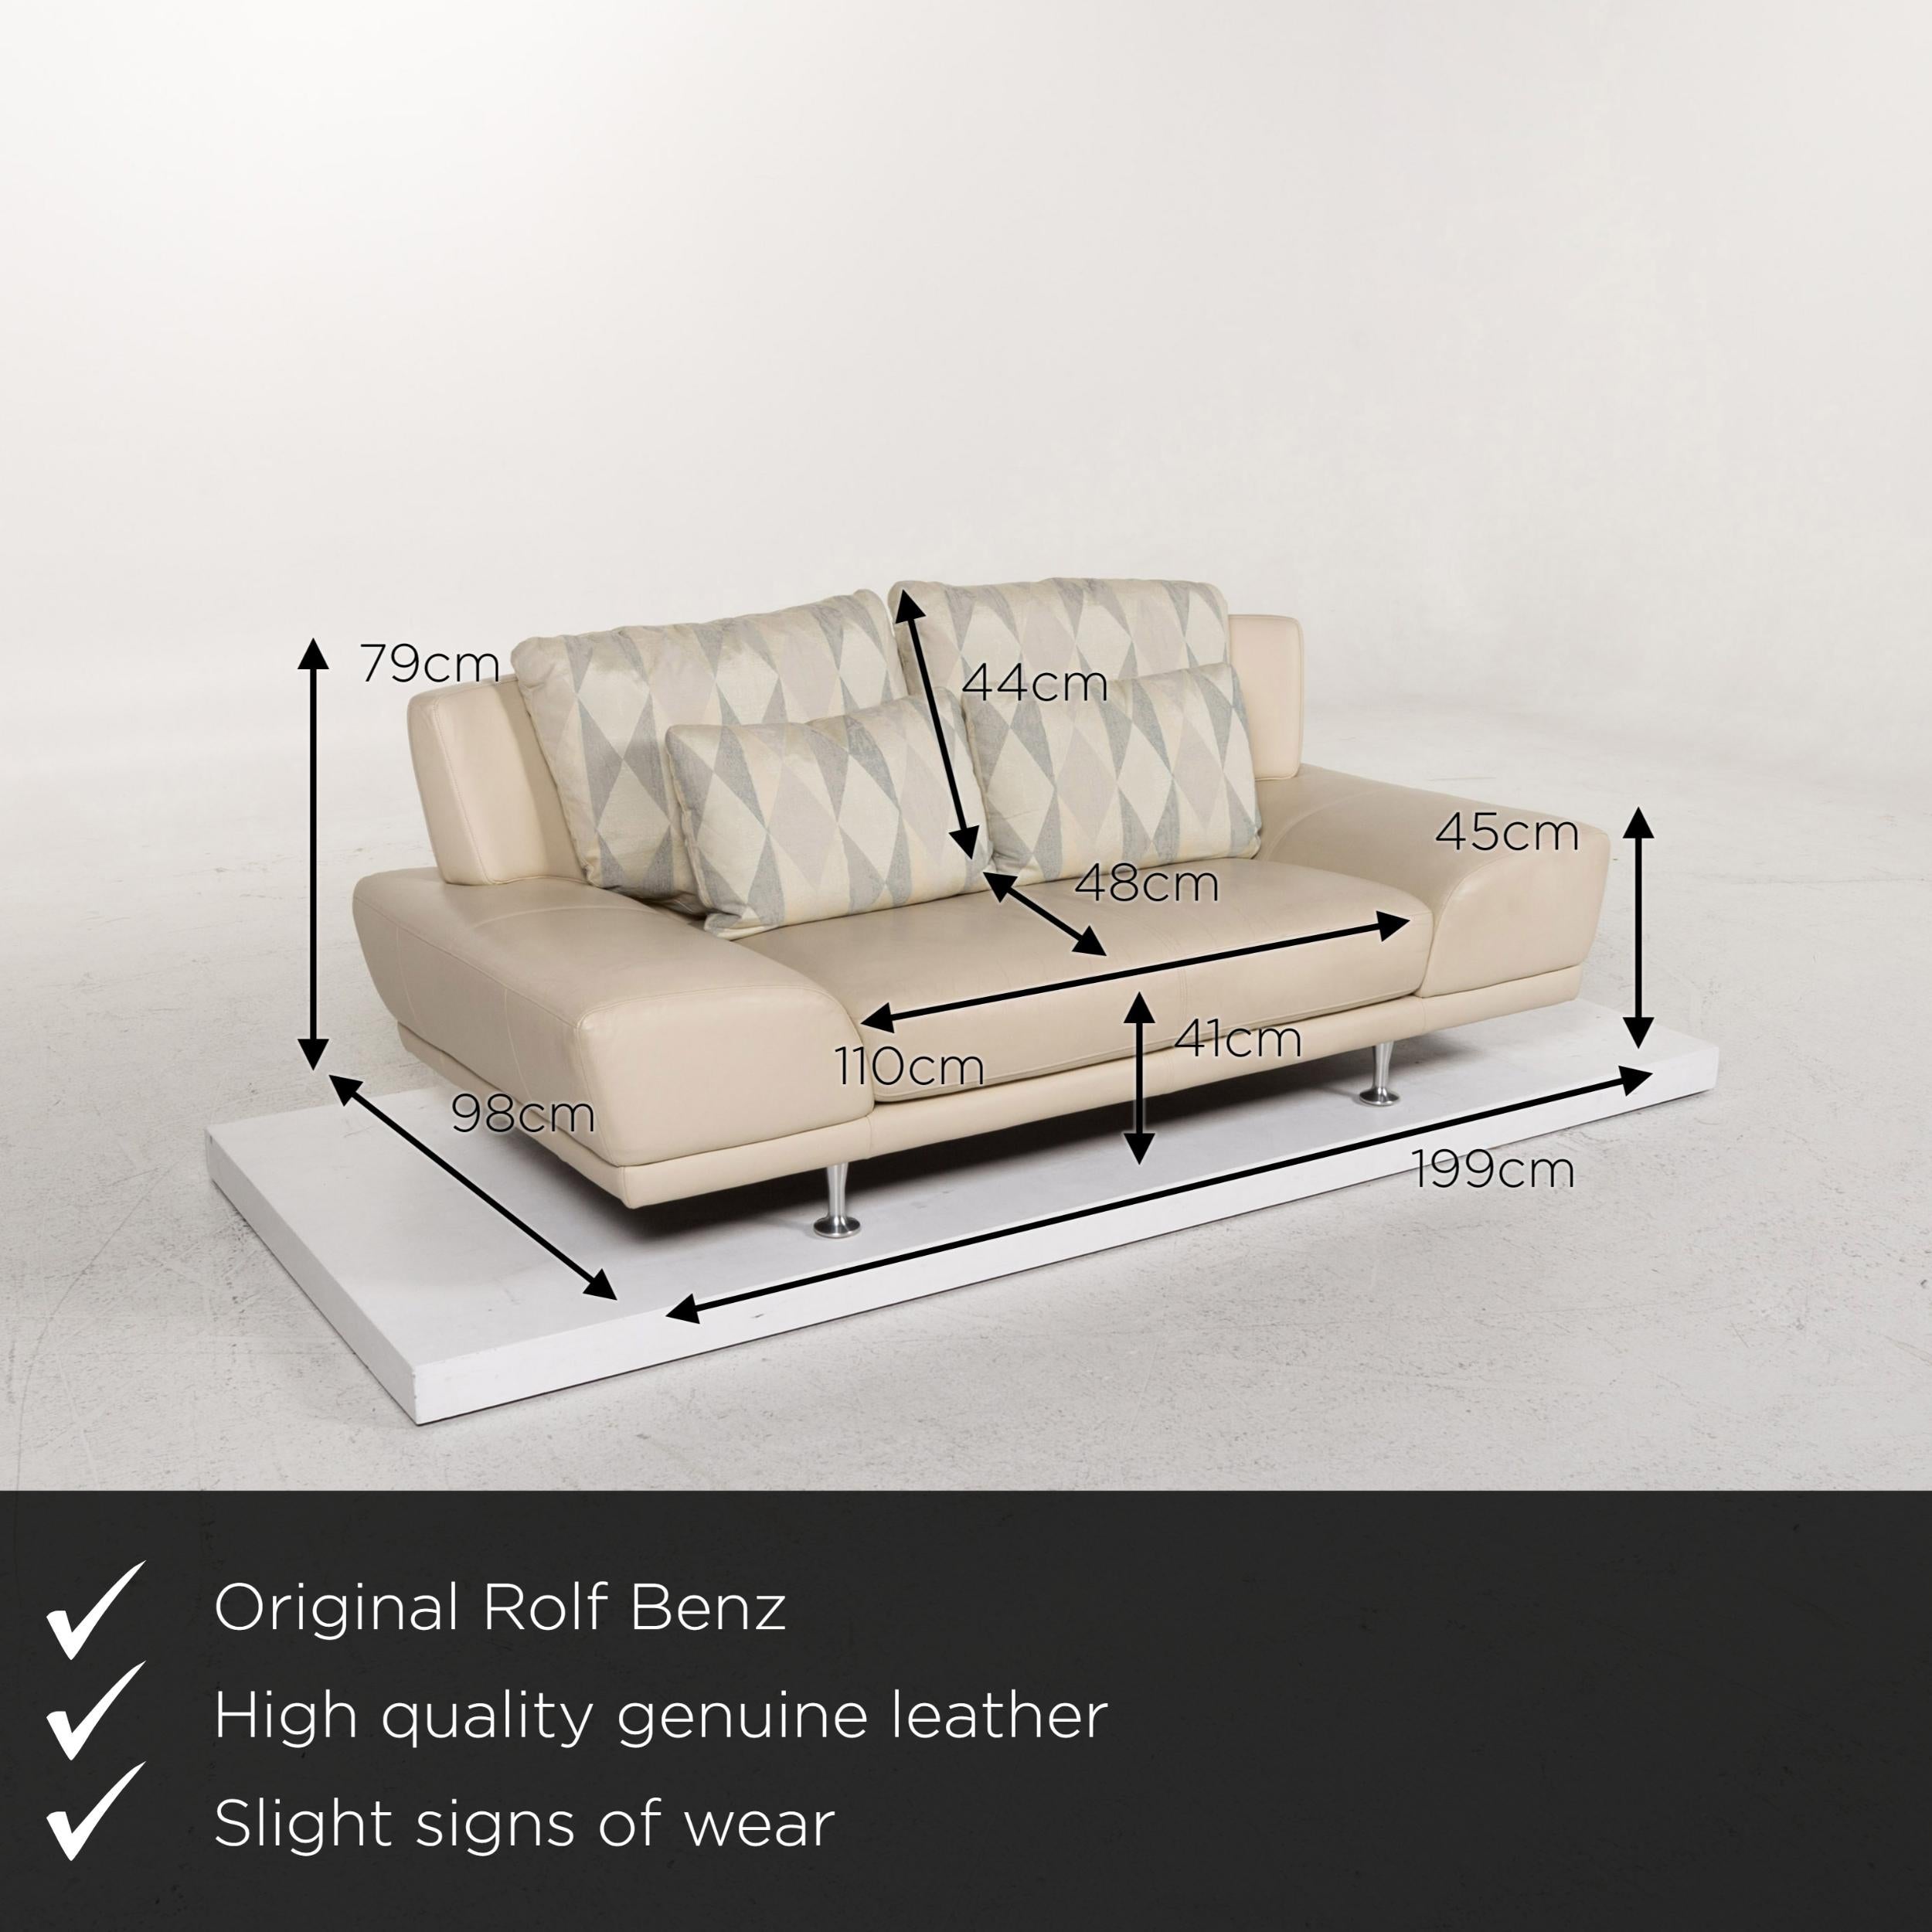 We present to you a Rolf Benz leather sofa cream two-seat couch.
 

 Product measurements in centimeters:
 

Depth 98
Width 199
Height 79
Seat height 41
Rest height 45
Seat depth 48
Seat width 110
Back height 44.
 
    